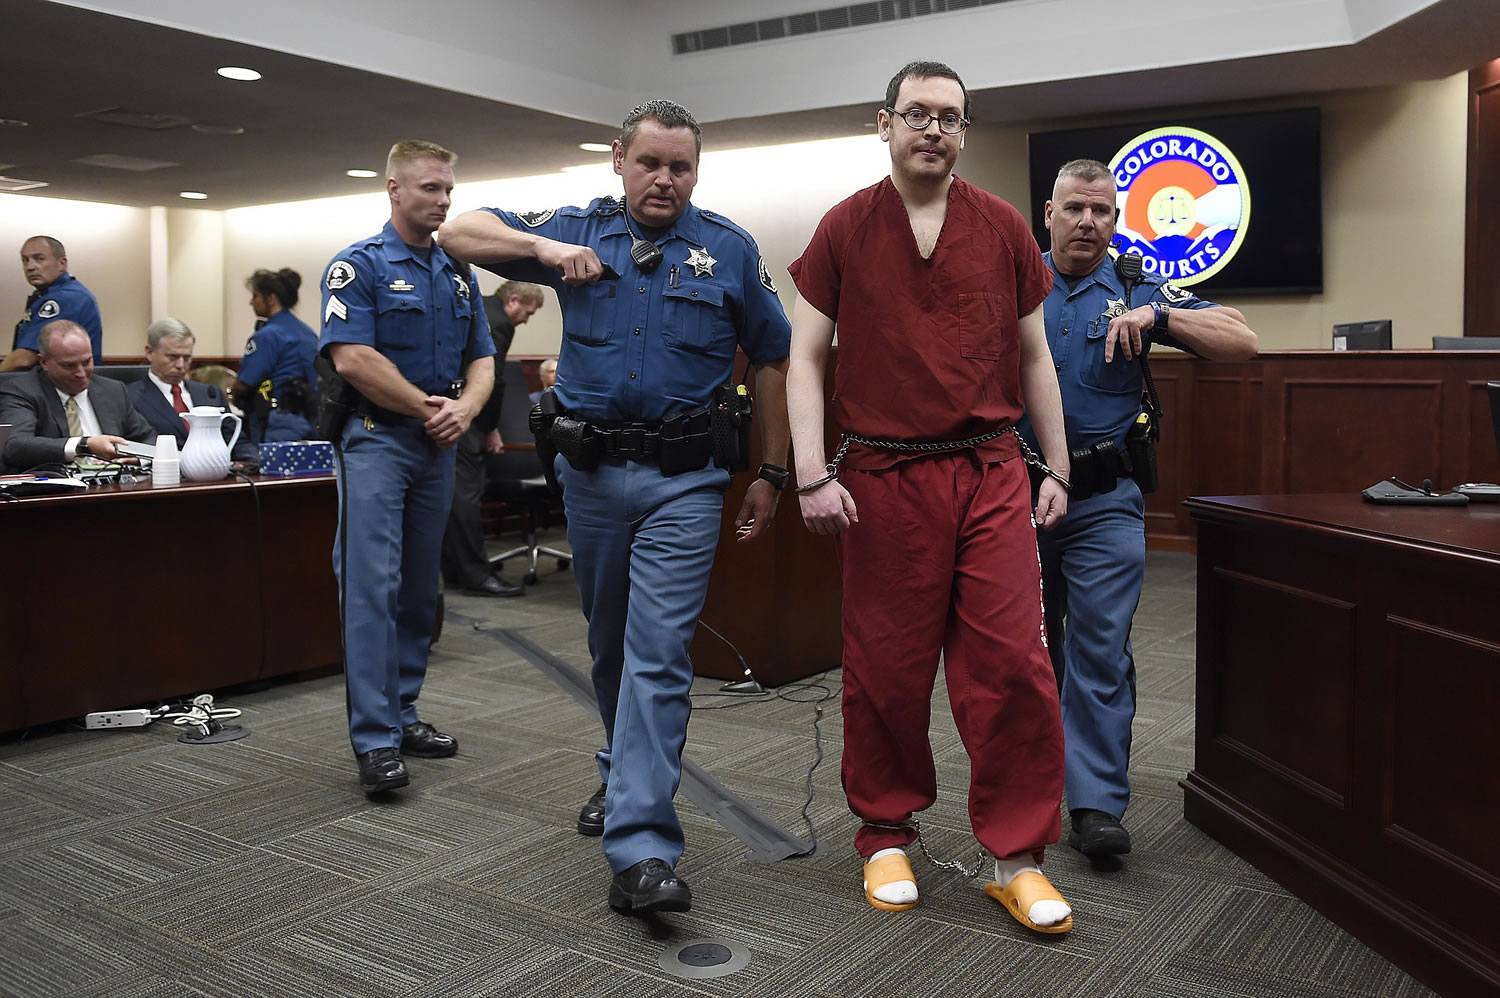 RJ SANGOSTI/The Denver Post via AP
James Holmes is led out of the courtroom Wednesday after being formally sentenced in Centennial, Colo. He was sentenced to life in prison without parole.